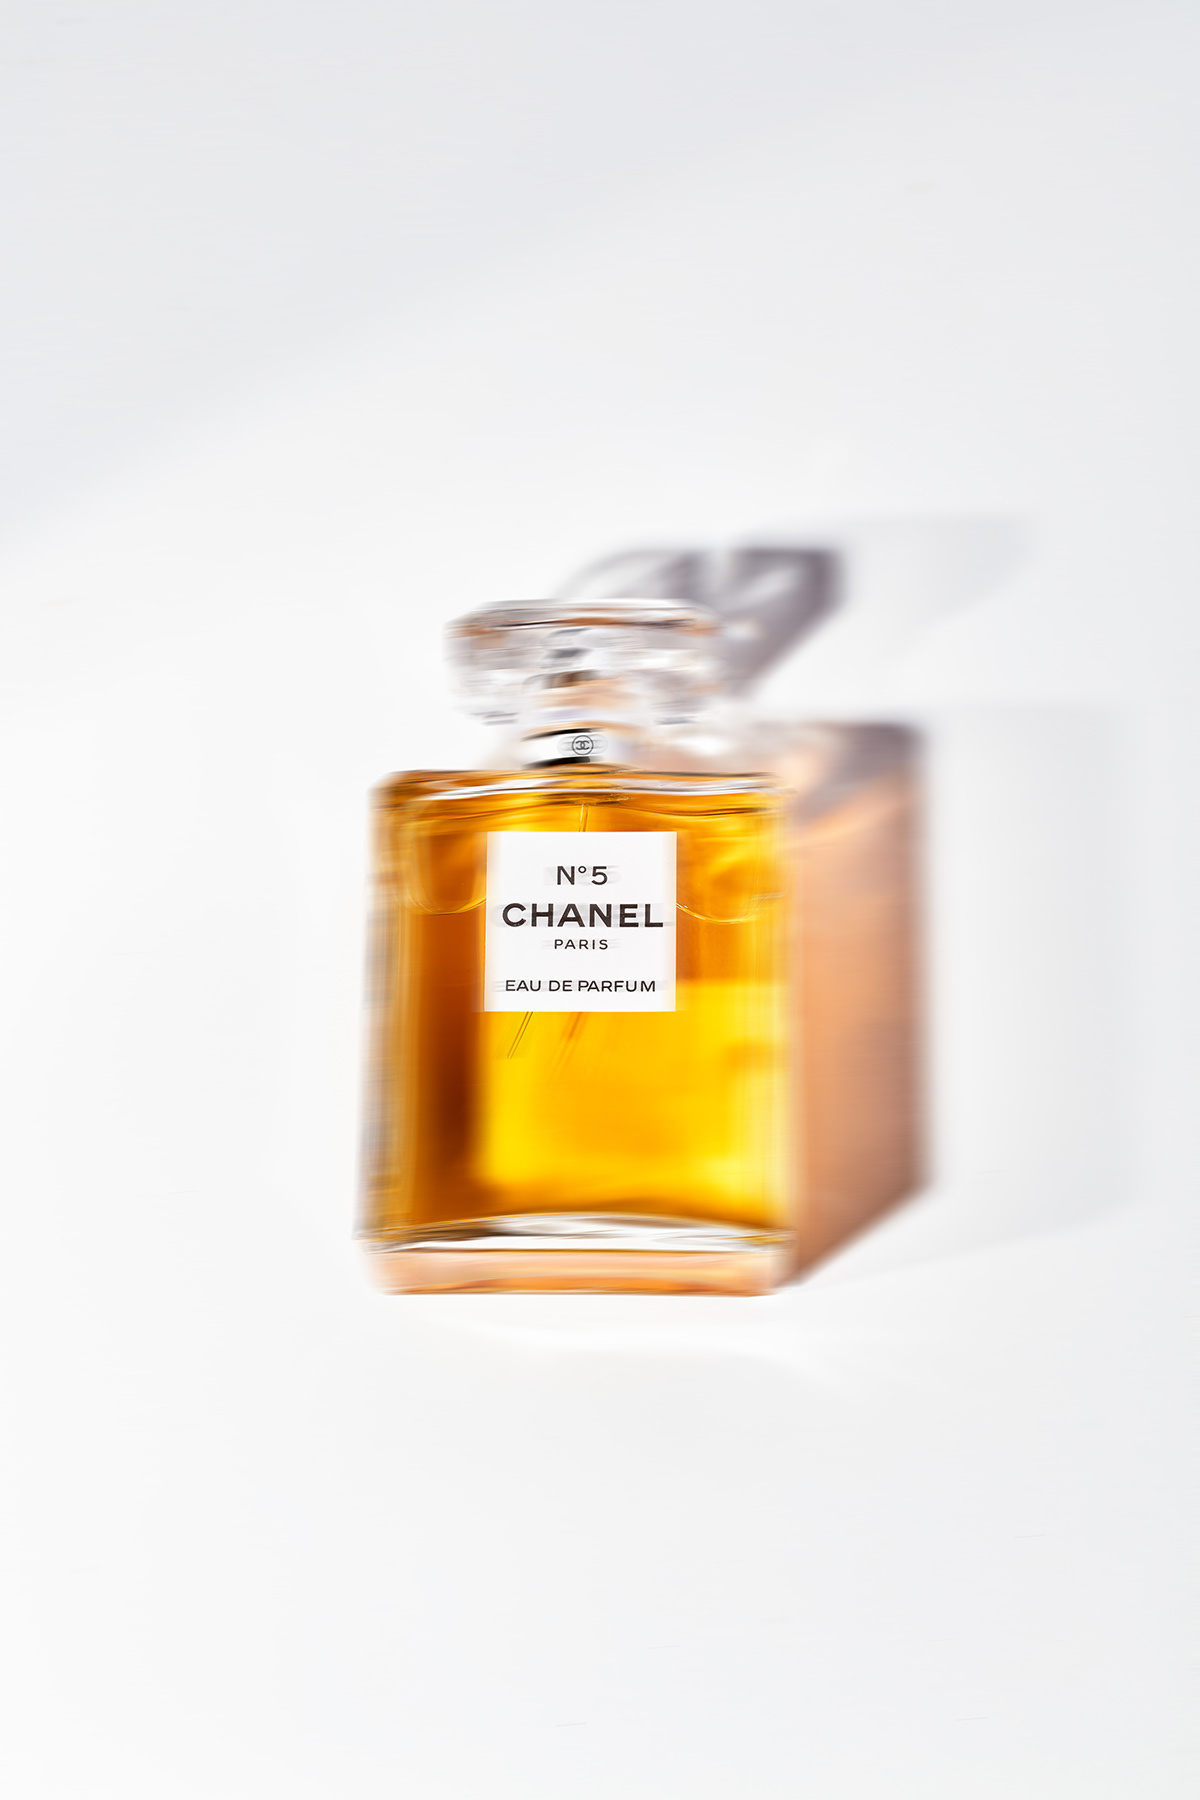 beauty Cosmetic grooming Photoraphy productphotography skincare stilllife chanel perfume tomford